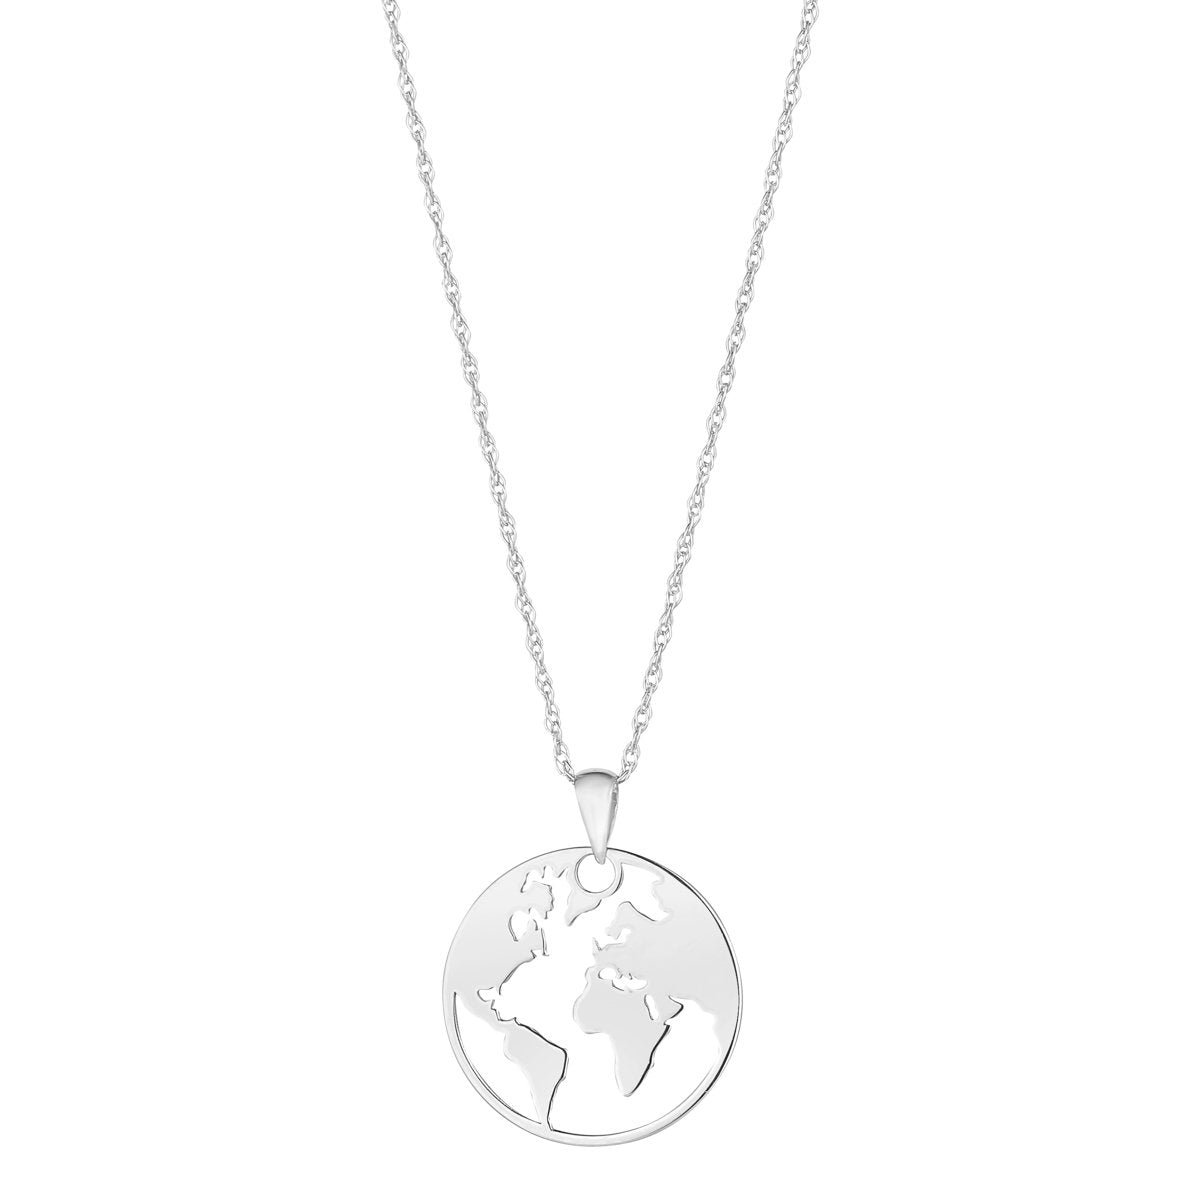 9ct White Gold World Necklace